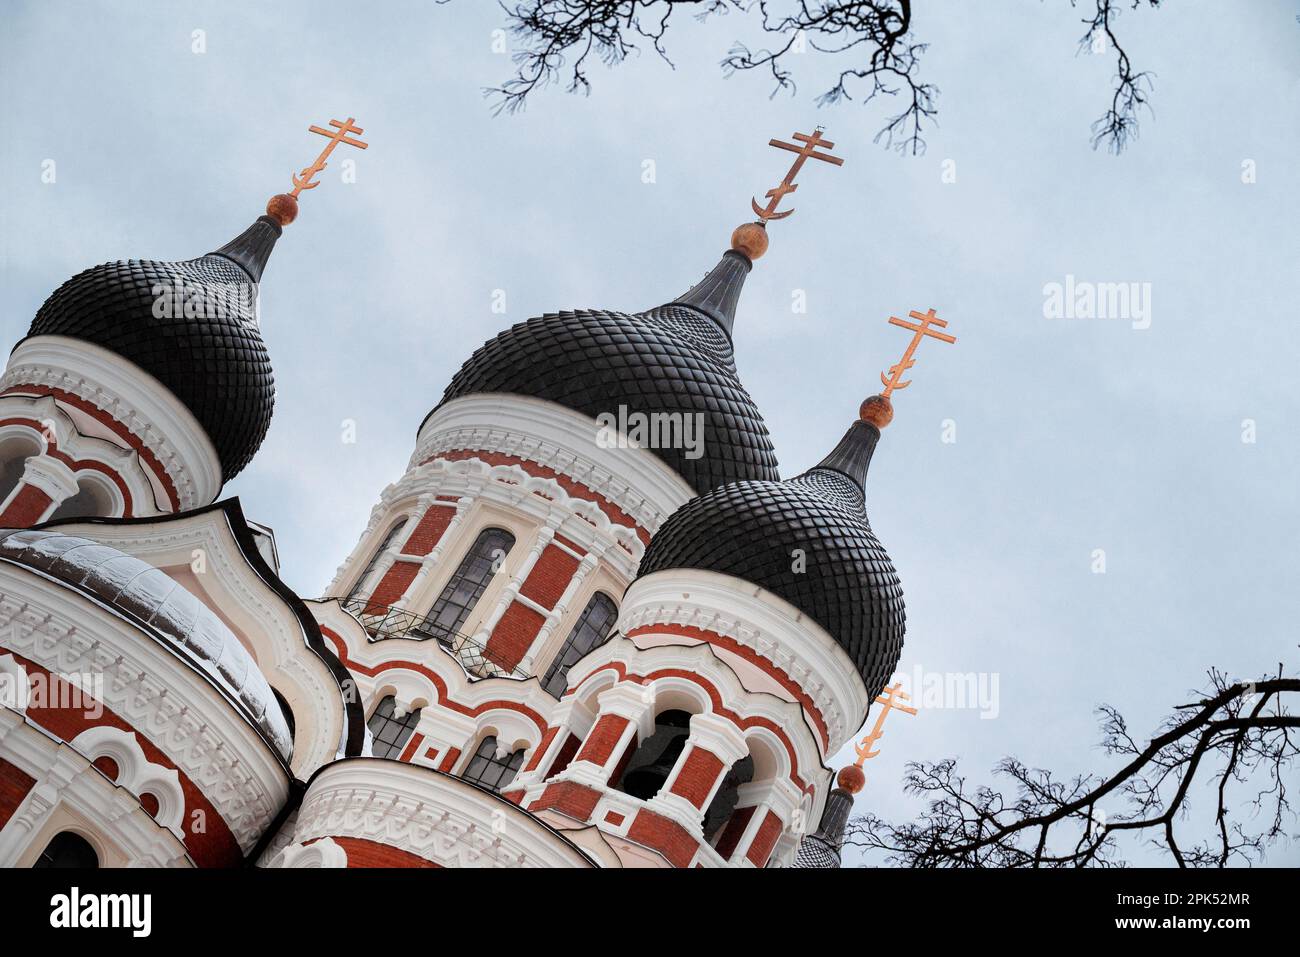 A majestic Alexander Nevsky Cathedral from a unique view, showcasing its intricate onion domes and Gothic architecture against a wintery white sky. Stock Photo